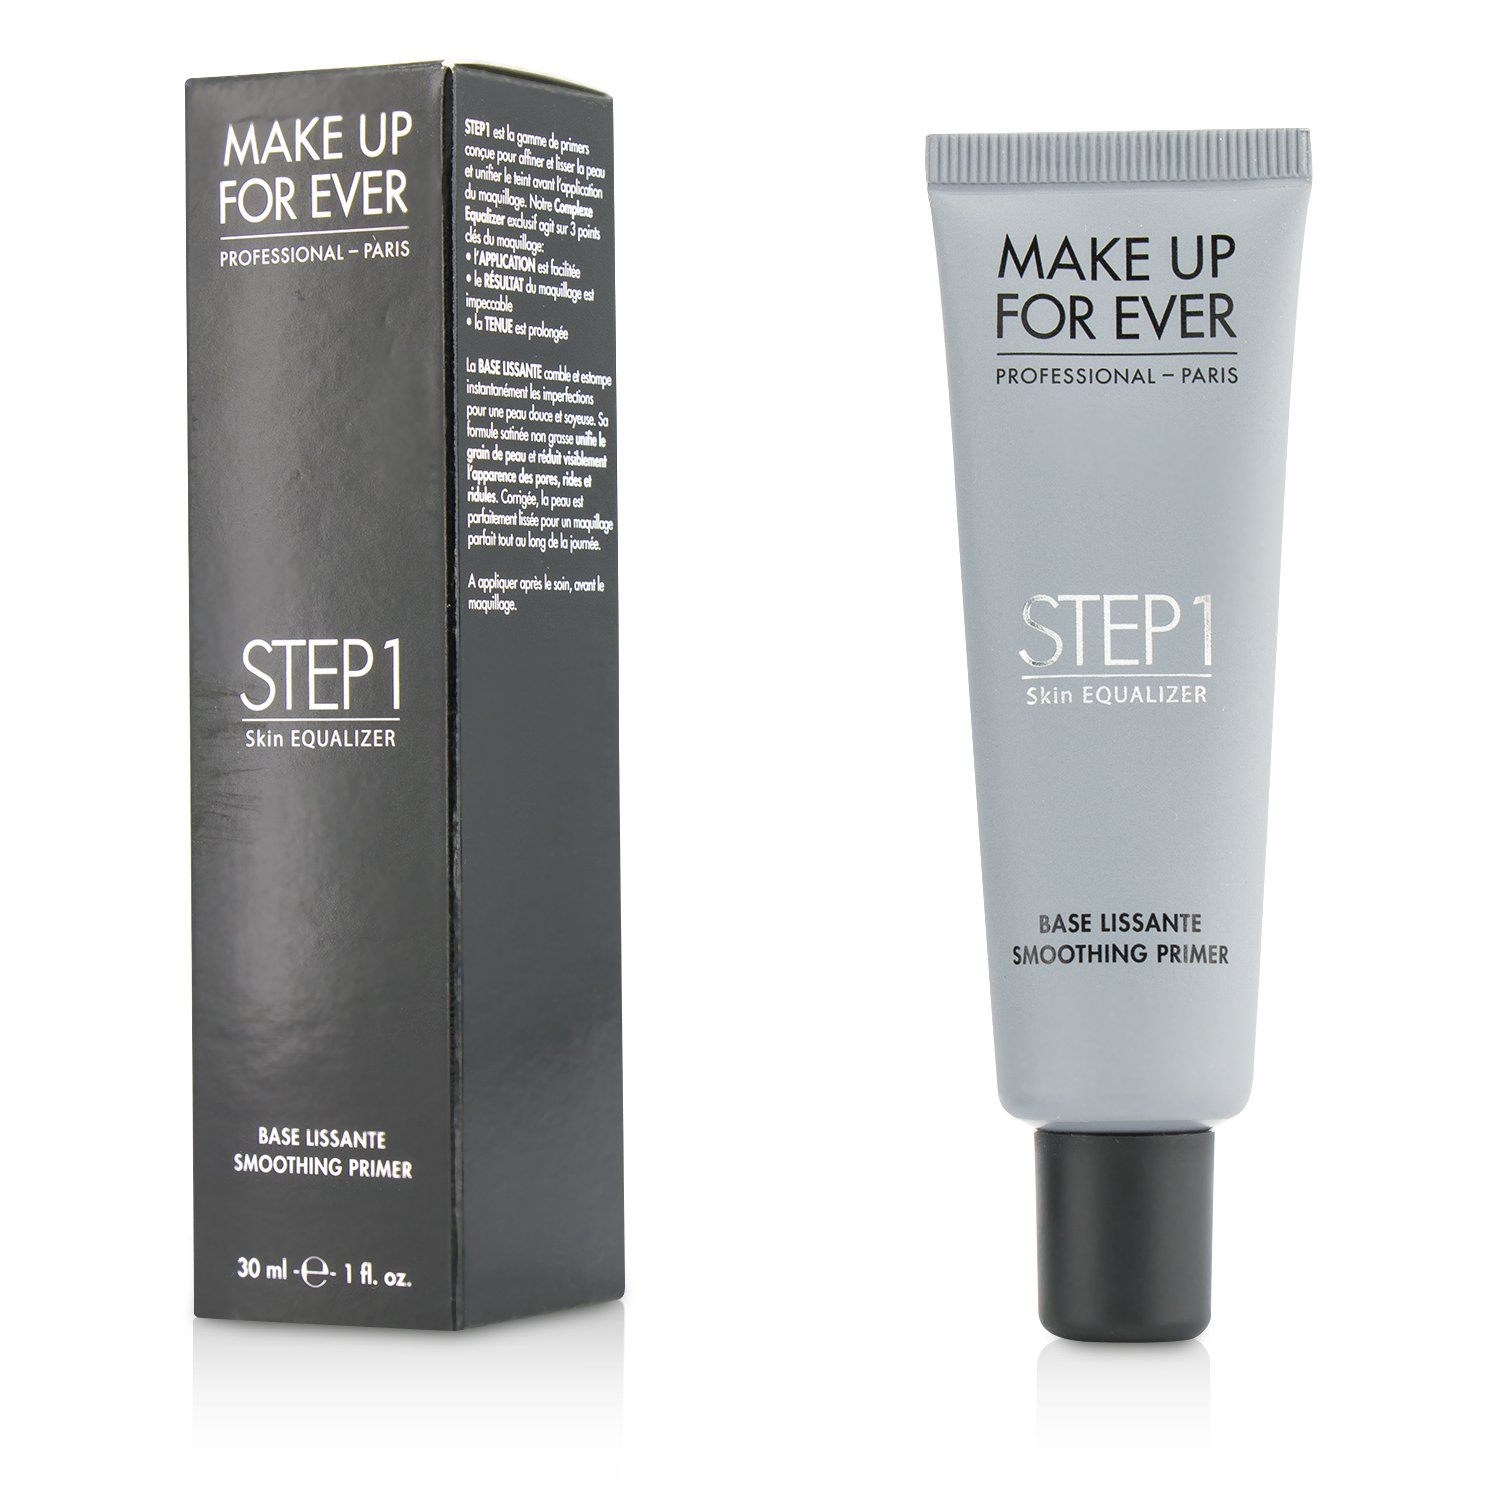 Make Up For Ever Step 1 Skin is one of the best  Pore minimizing primers that gives flawless skin